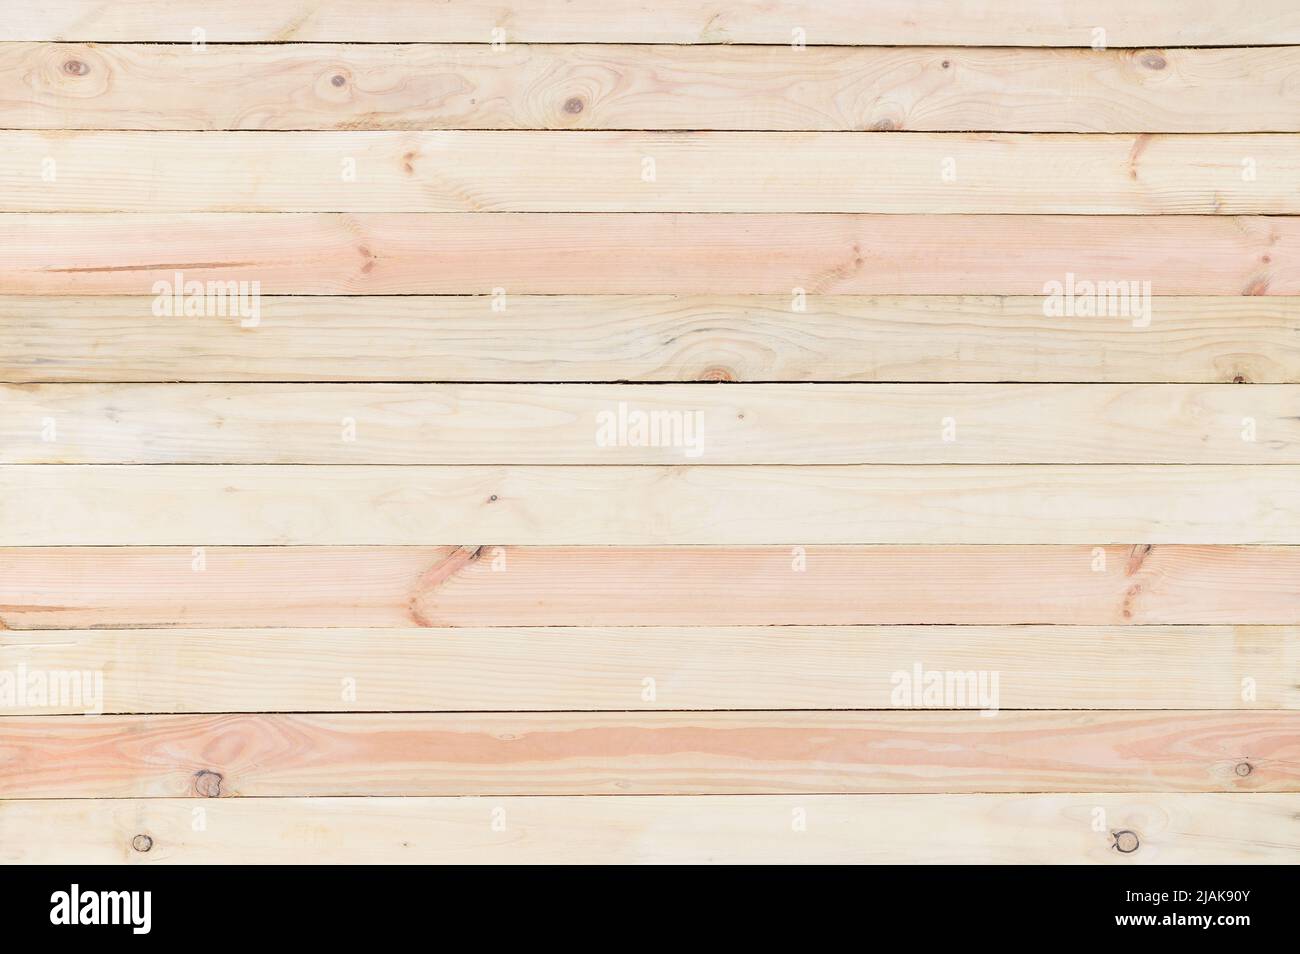 Wood plank wall texture background Stock Photo